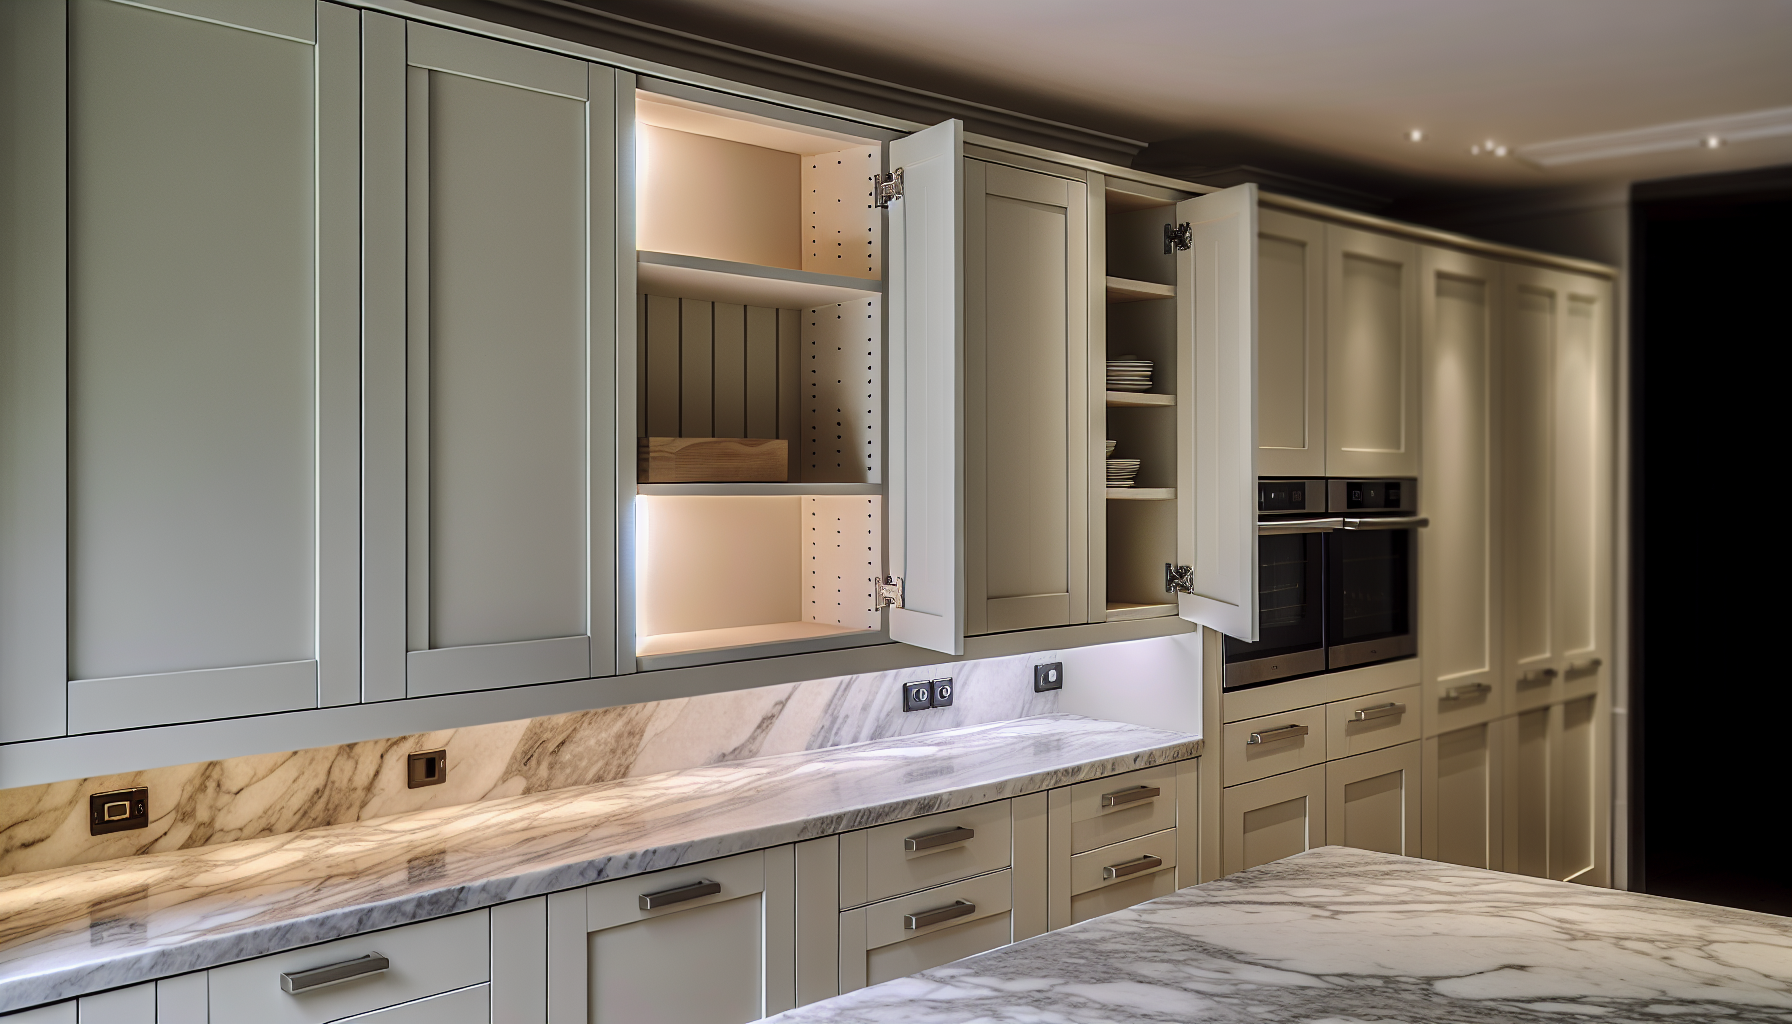 Custom kitchen cabinets for optimized space